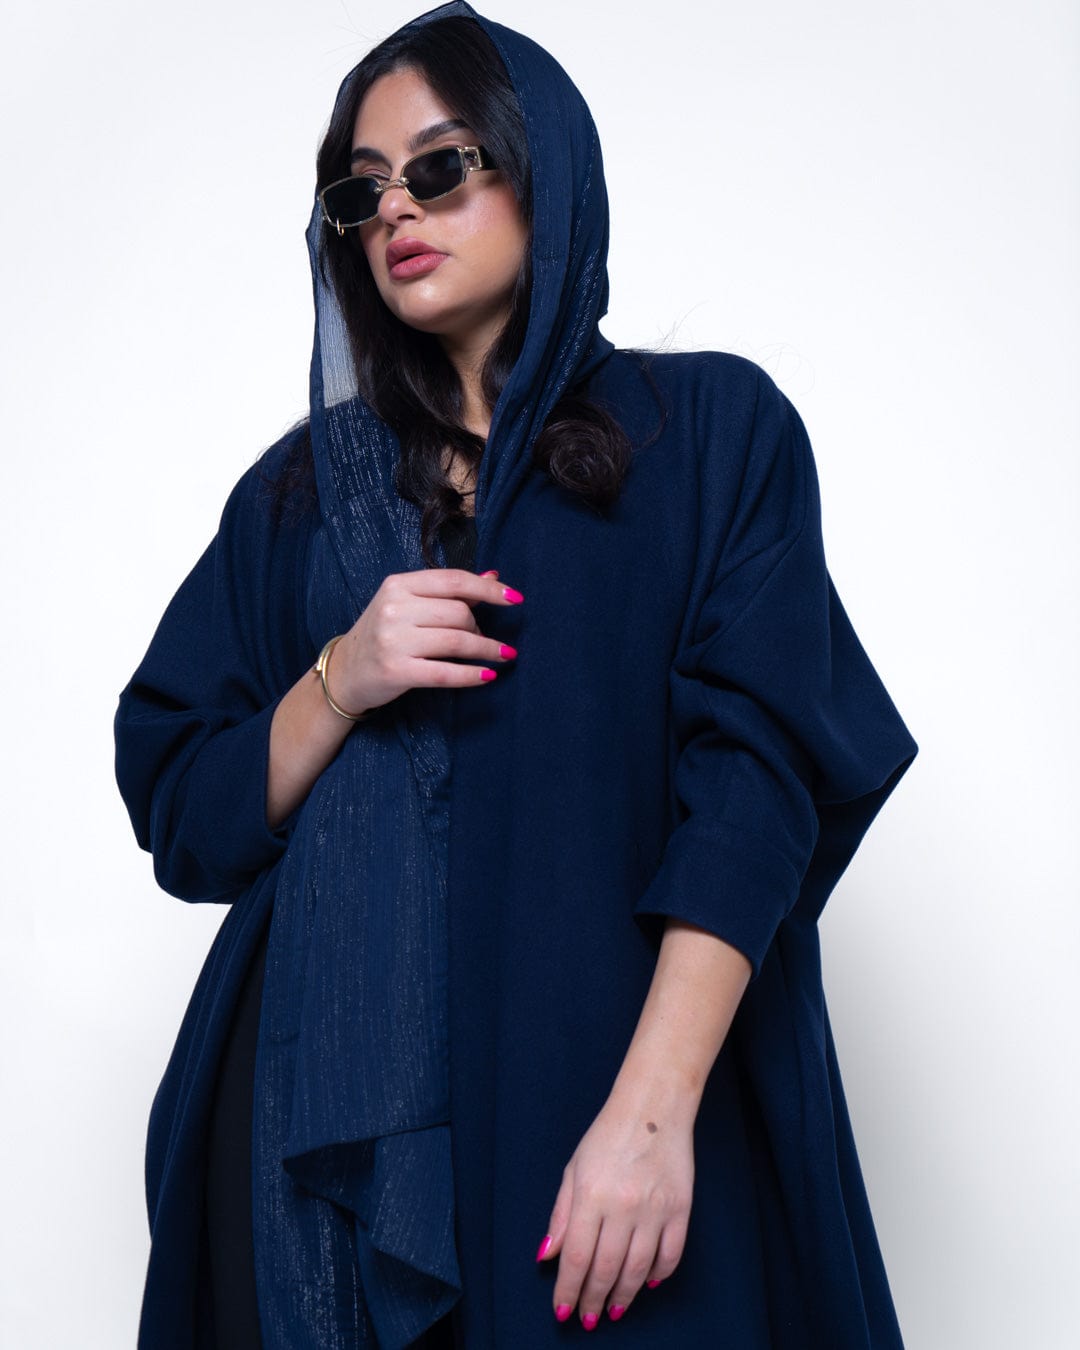 CL-0188 Loose fit abaya, navy blue colour broadcloth fabric